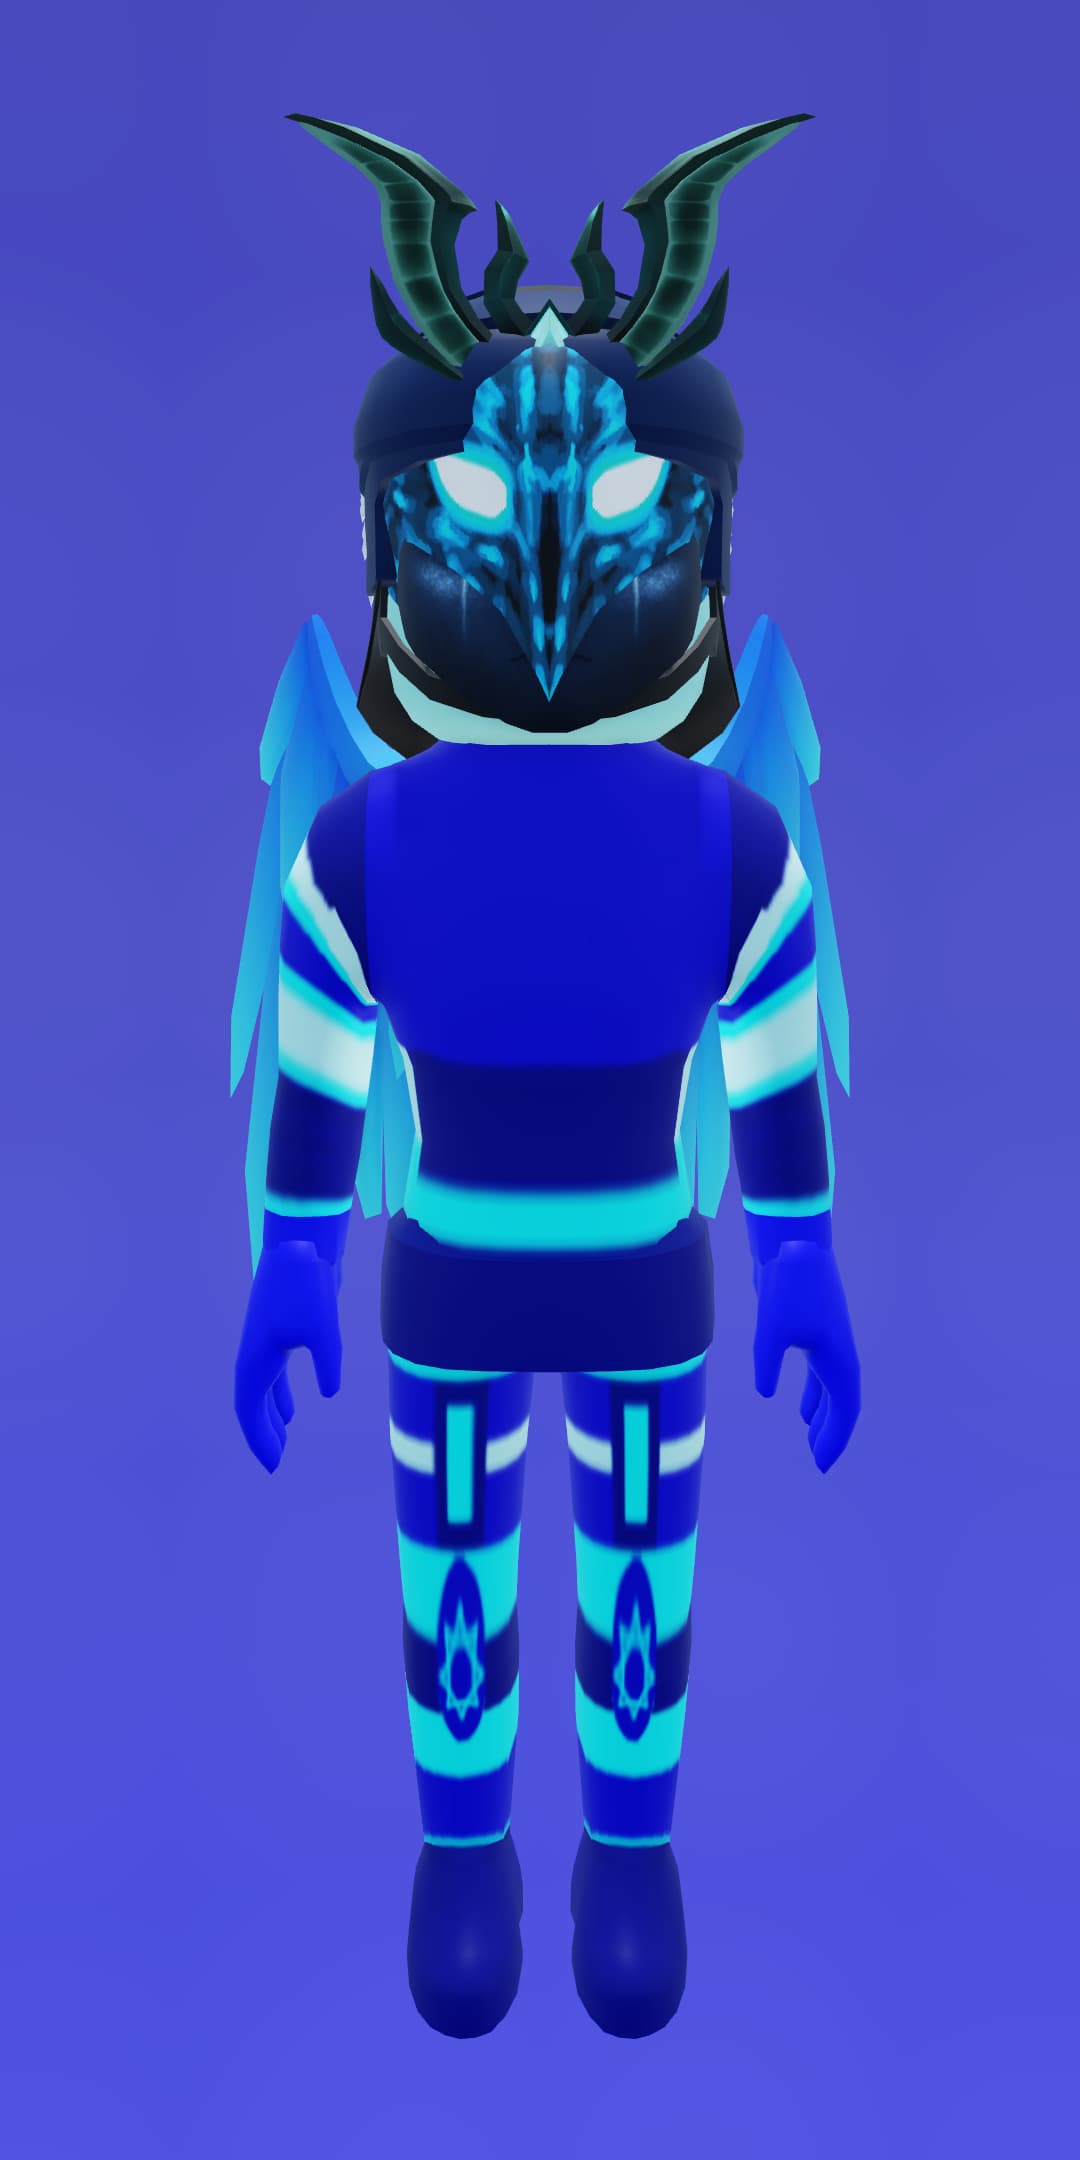 Post your roblox avatar and ill make a guess if you had a father - Off  Topic - Arcane Odyssey